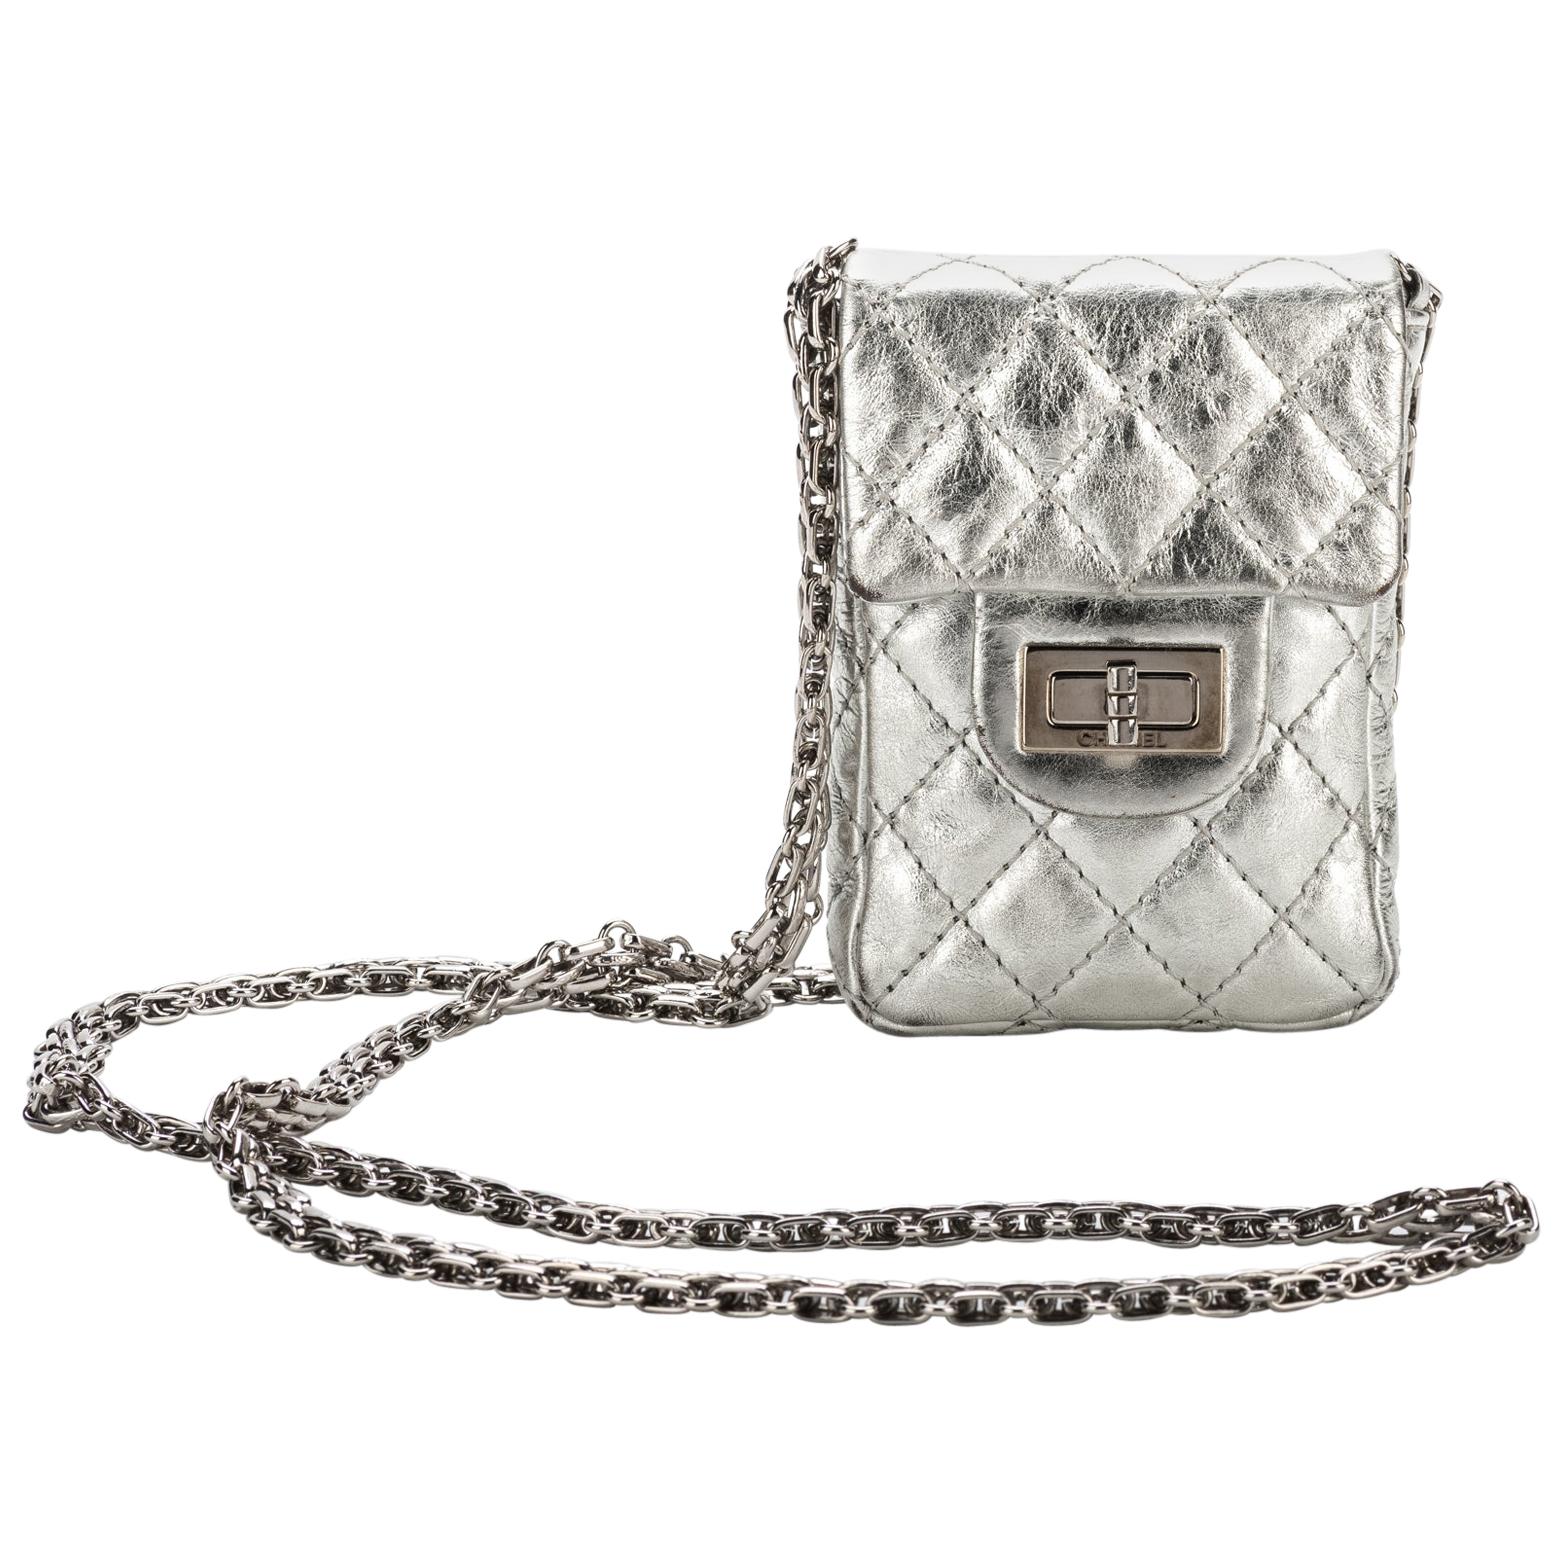 Classic black and white with this Chanel Cambon Crossbody Bag  Chanel  handbags Chanel Bags